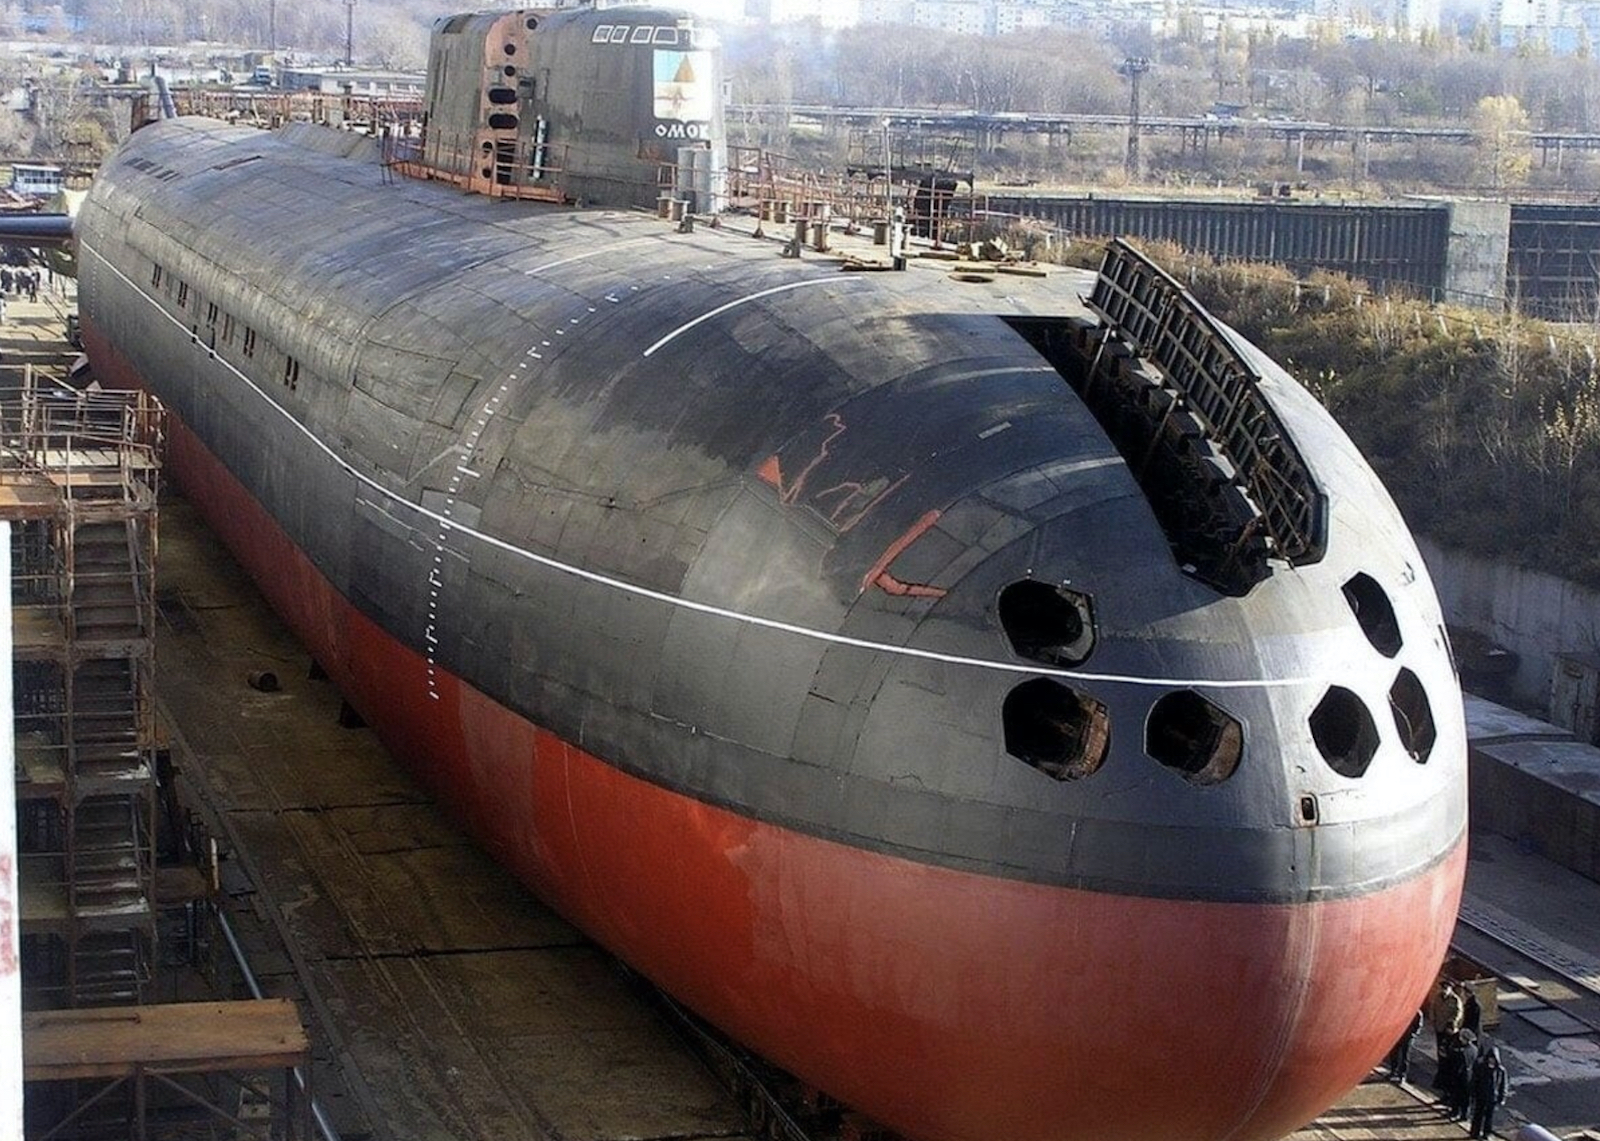 Belgorod: Russia’s giant new sub built for nuclear war